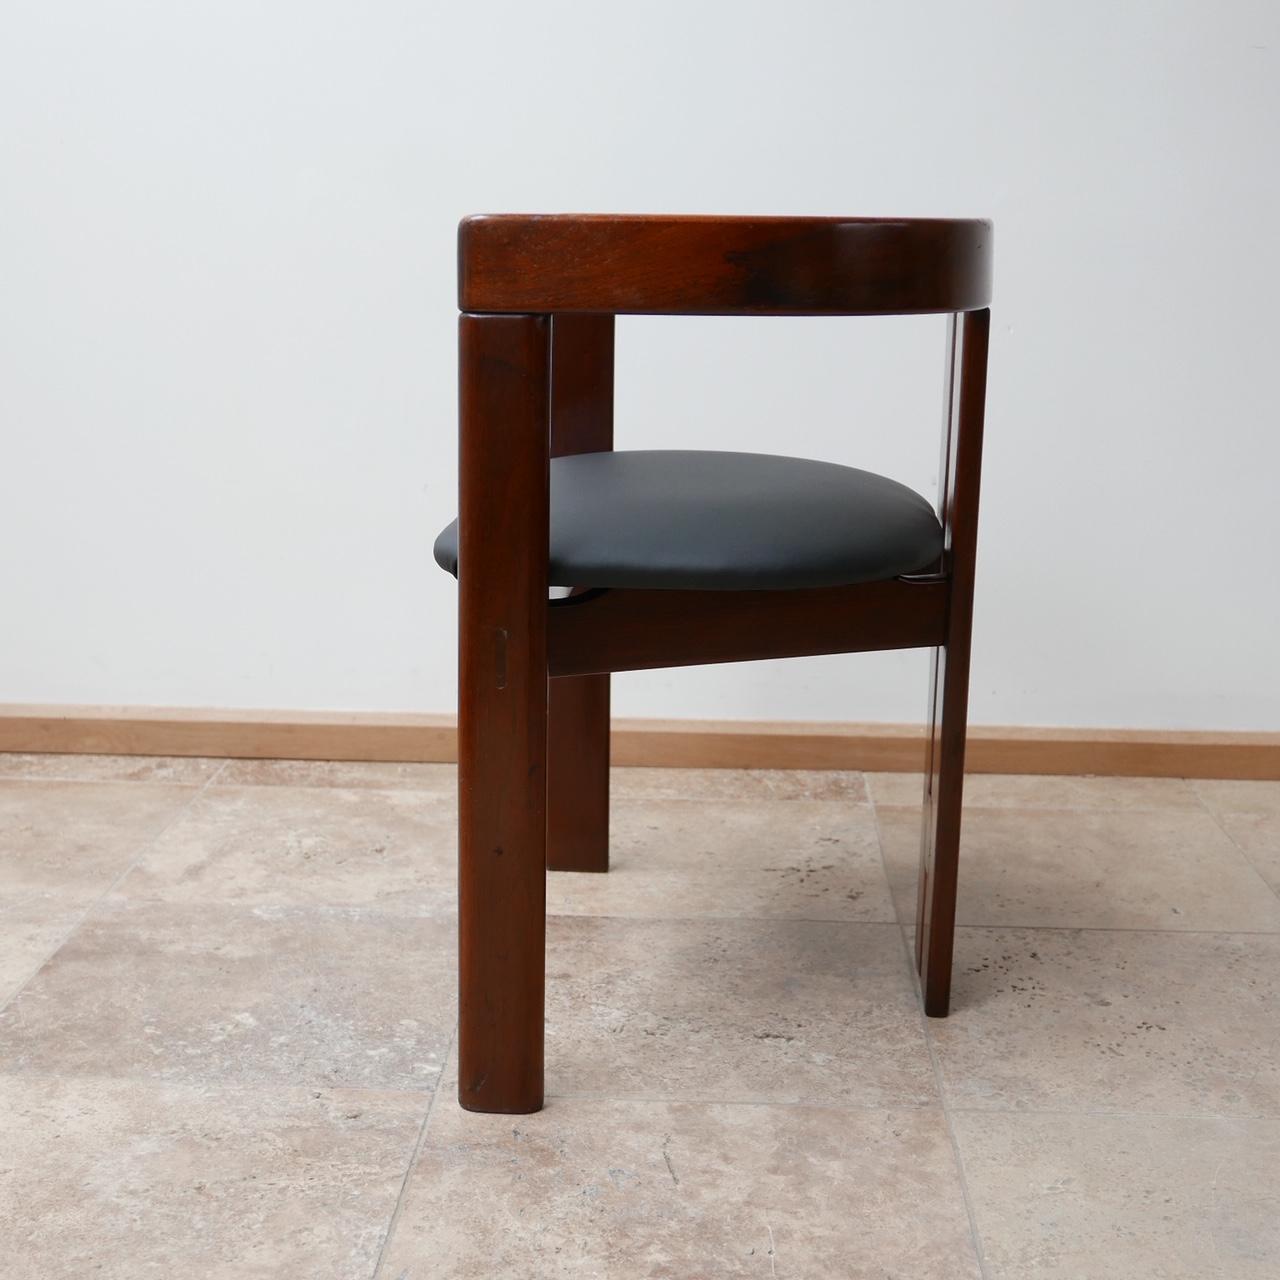 'Pigreco' Italian Midcentury Dining Chairs Attributed to Tobia Scarpa 1